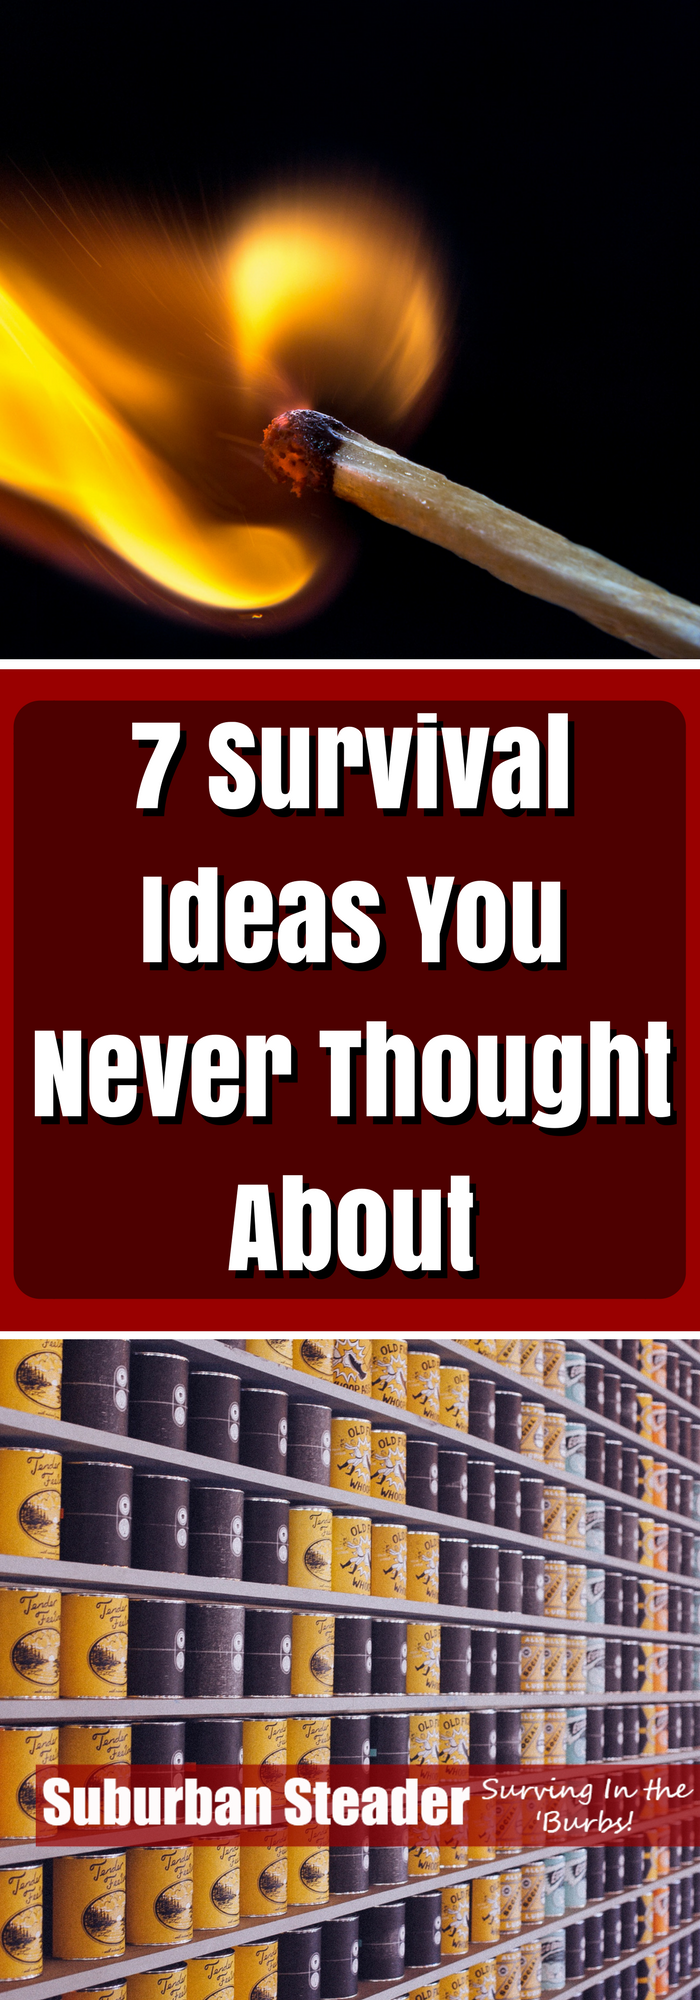 7 Survival Ideas You Never Thought About